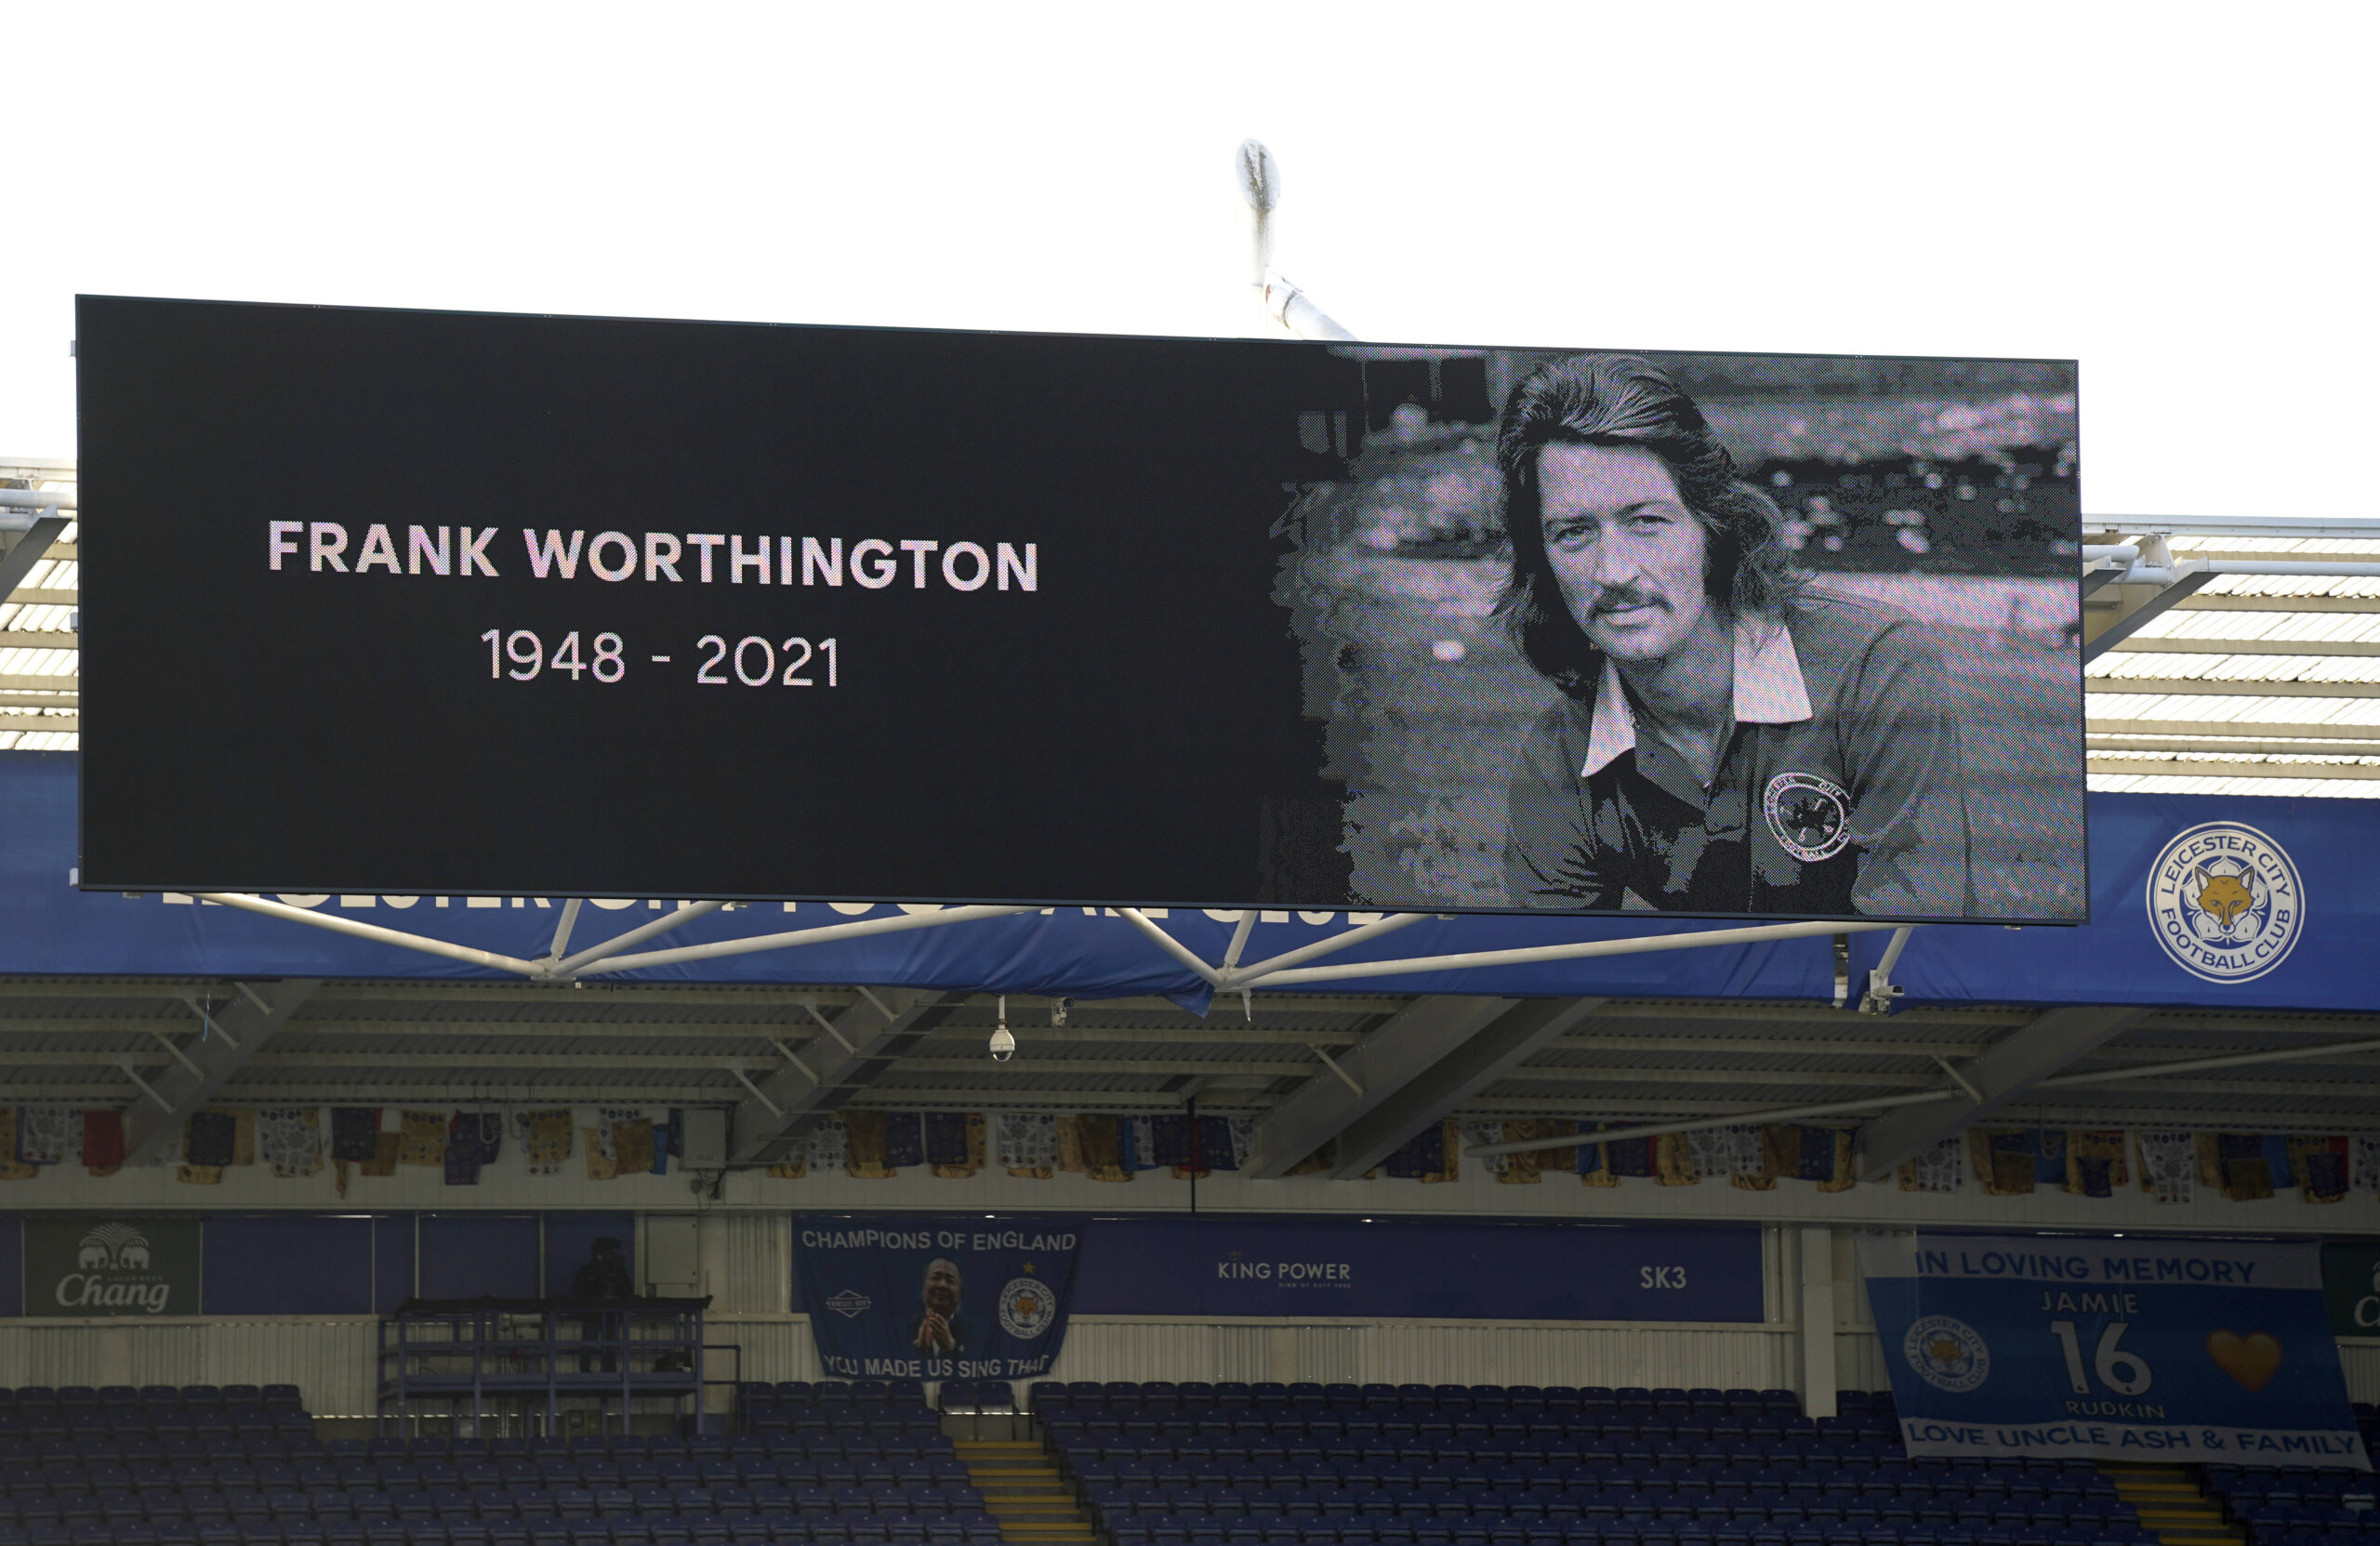 IMAGO / PA Images Leicester City v Manchester City - Premier League - King Power Stadium A minutes applause for Frank Worthington is observed before the Premier League match at The King Power Stadium, Leicester. Issue date: Saturday April 3, 2021.